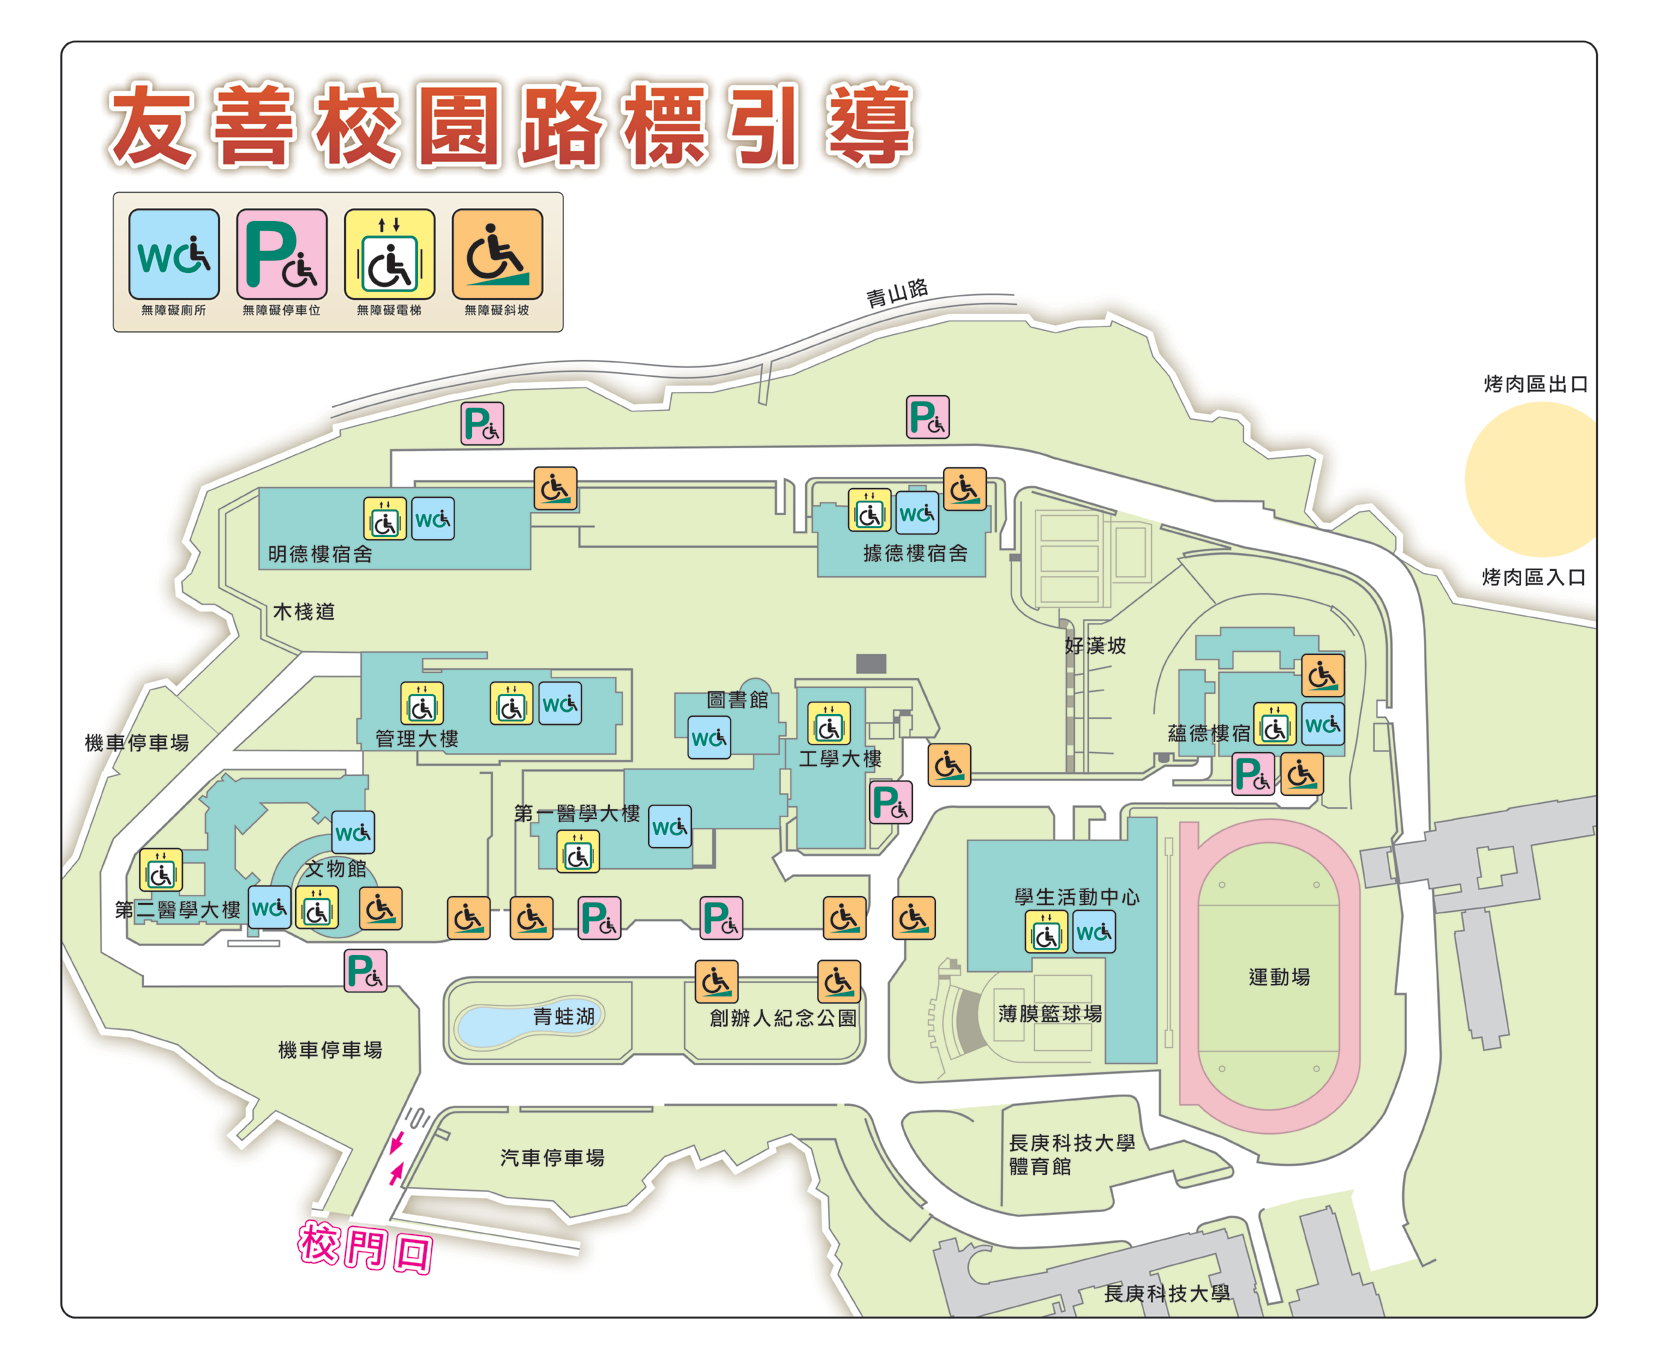 Location map of the wheelchair-friendly facilities in the university compound